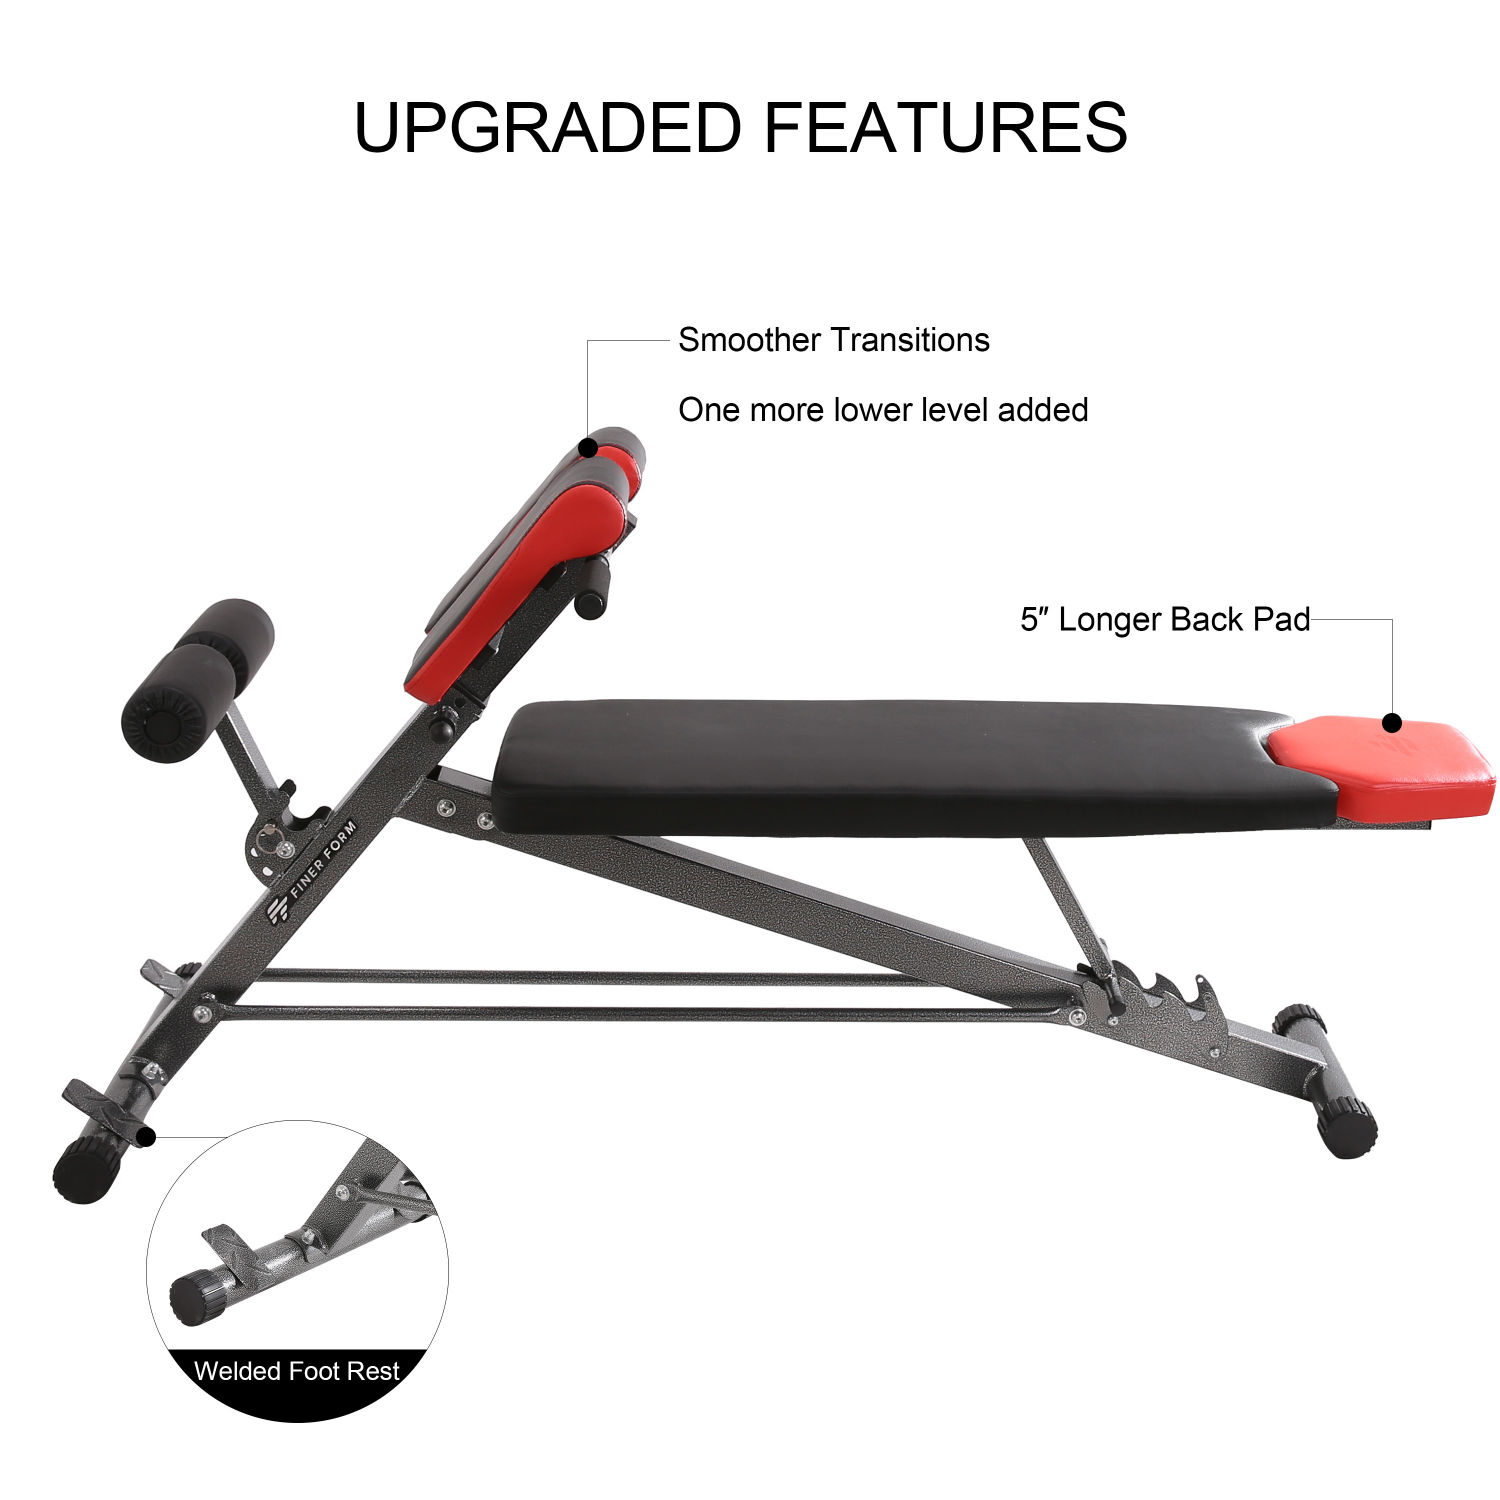 Flat Bench Multi-Functional Bench for Full All-in-One Body Workout–Hyper Back Extension Decline Bench Fitness Bench Adjustable Ab Sit up Bench Roman Chair